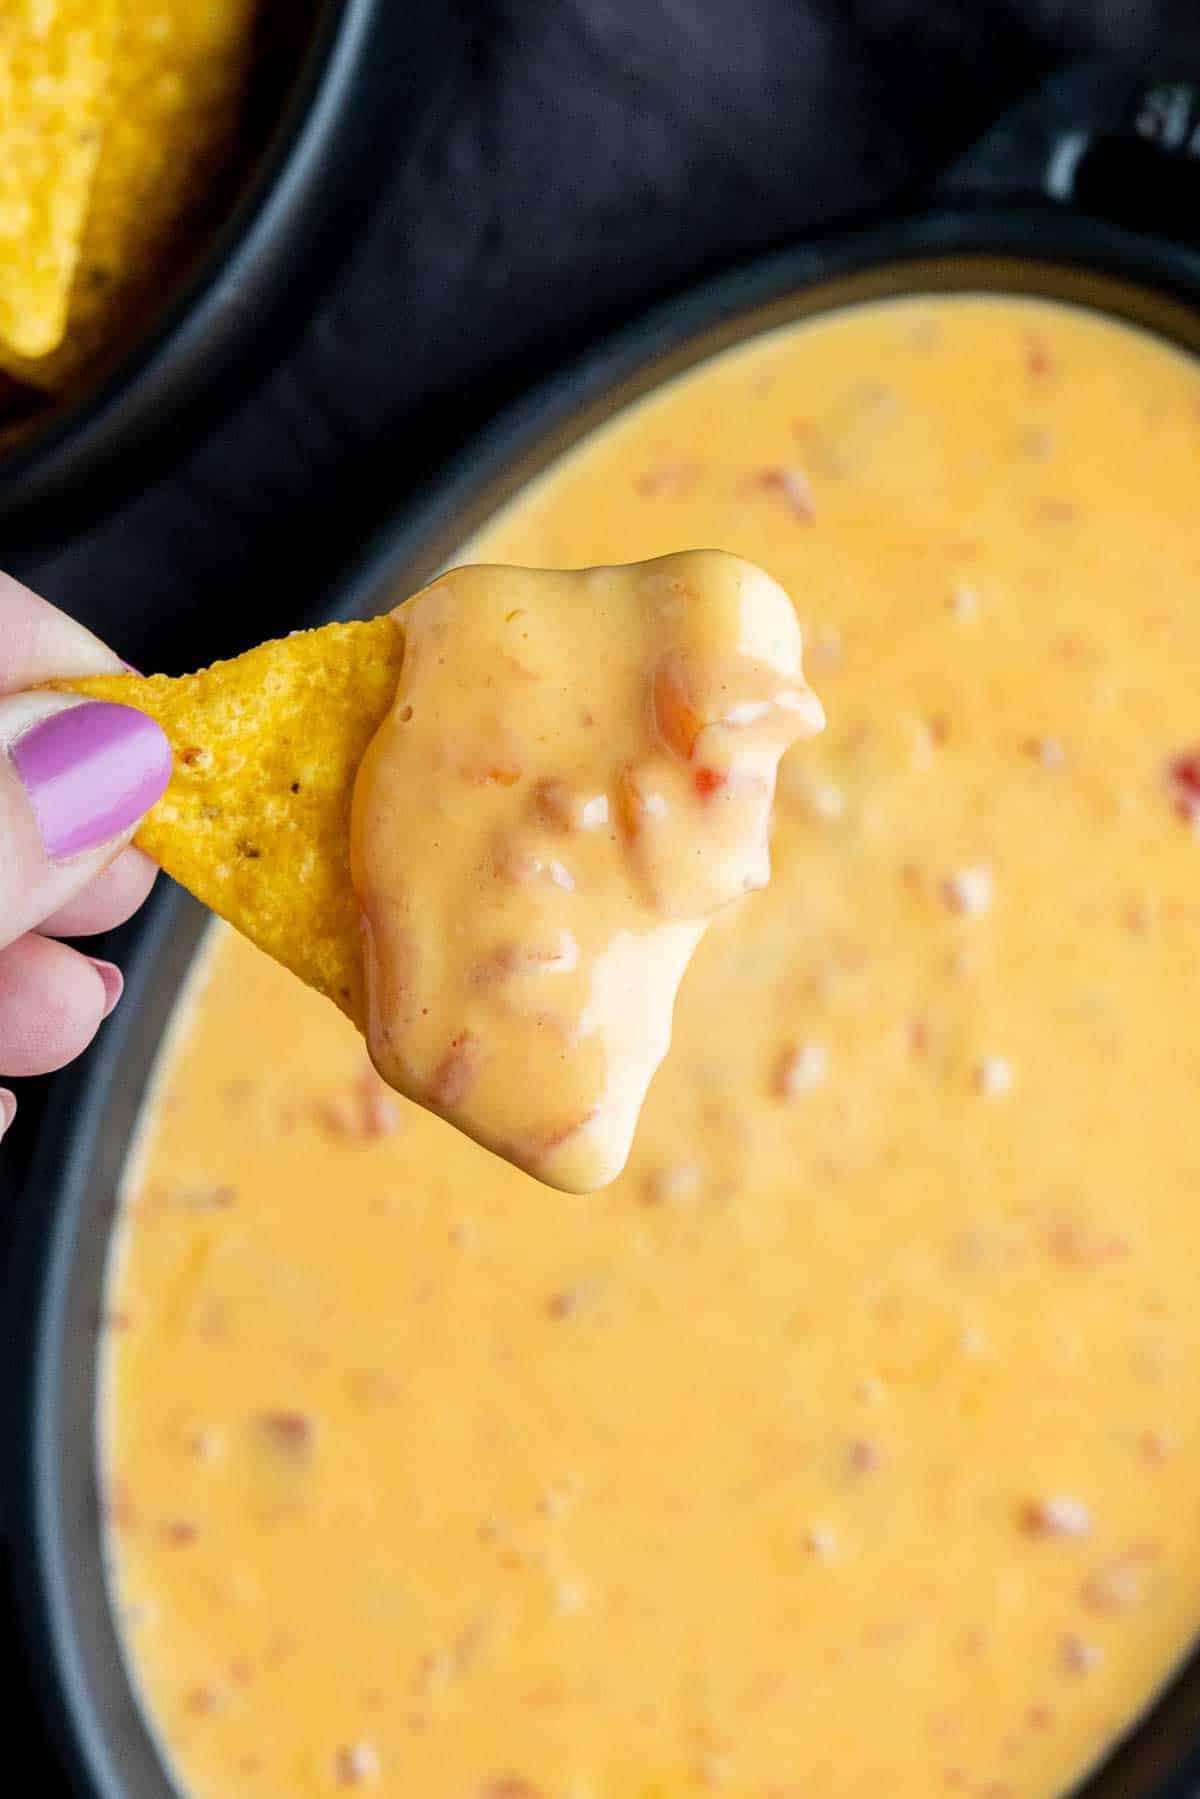 holding a chip dipped in Rotel Dip